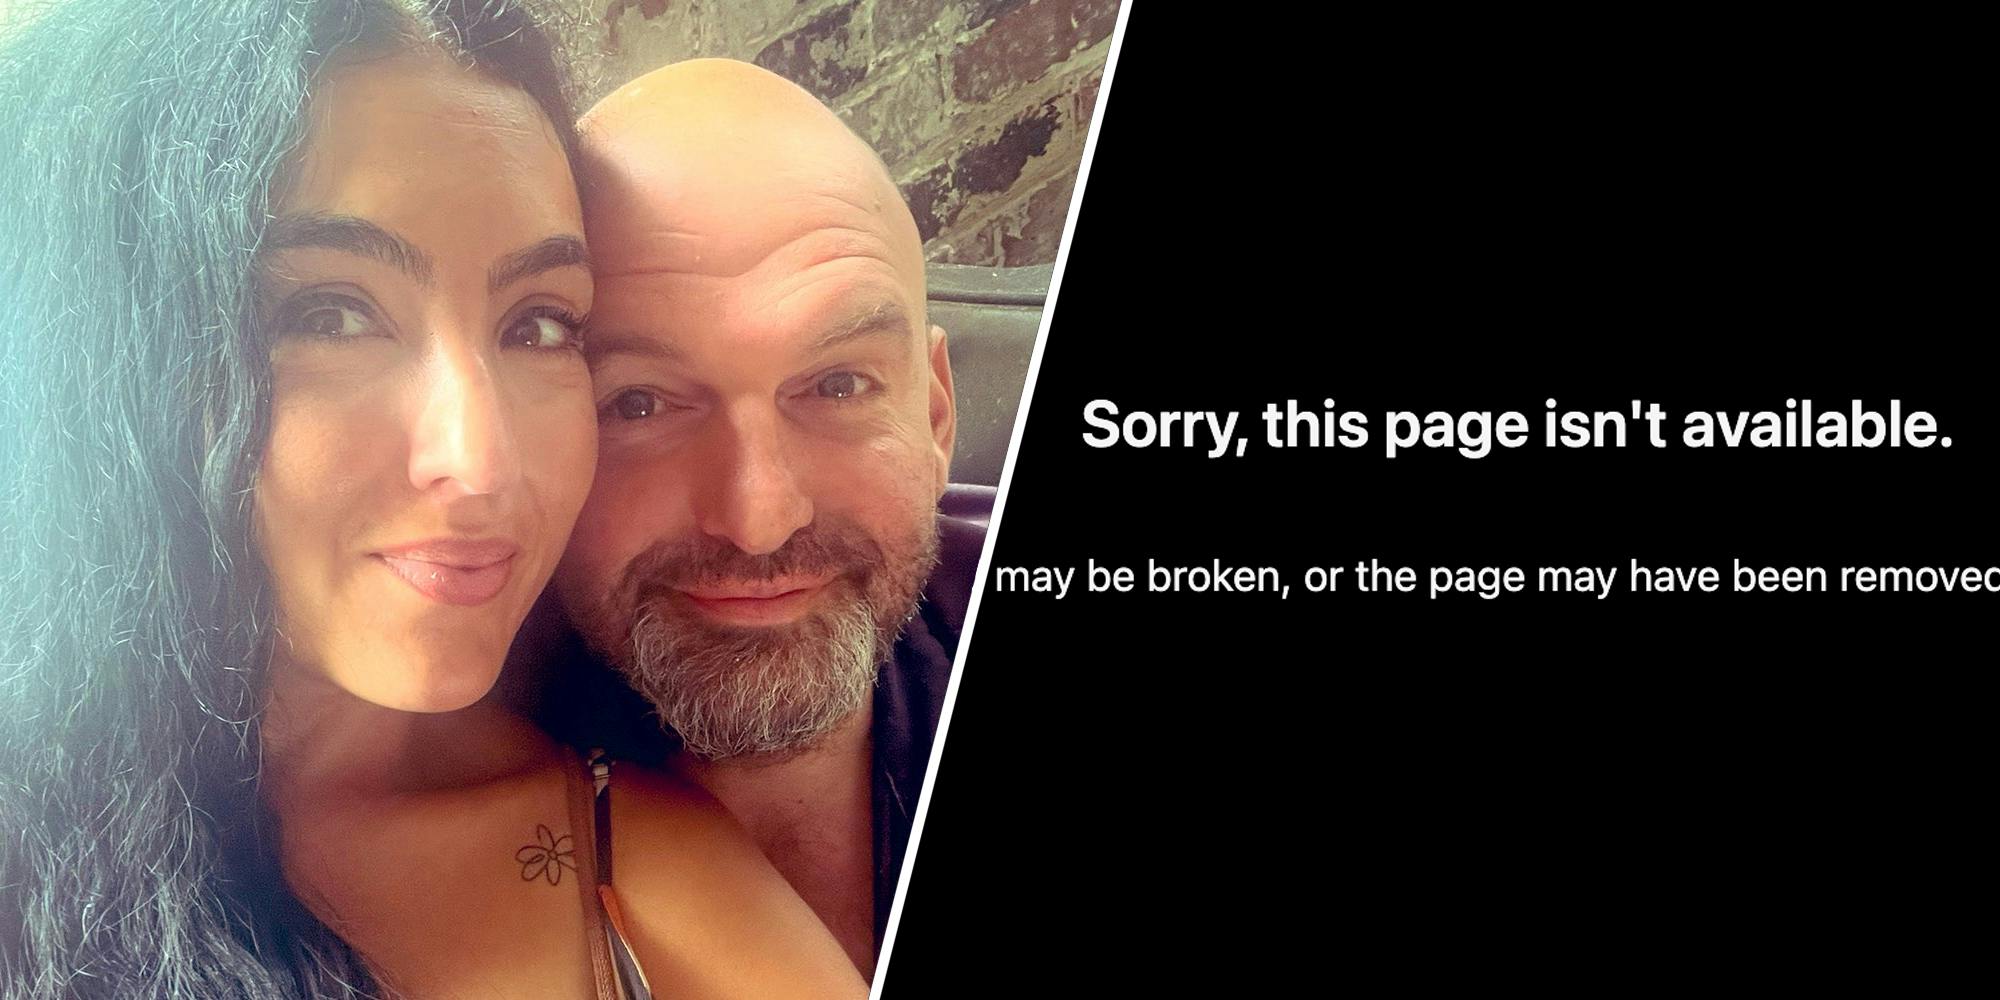 Gisele and John Fetterman(l), Page not available(r)